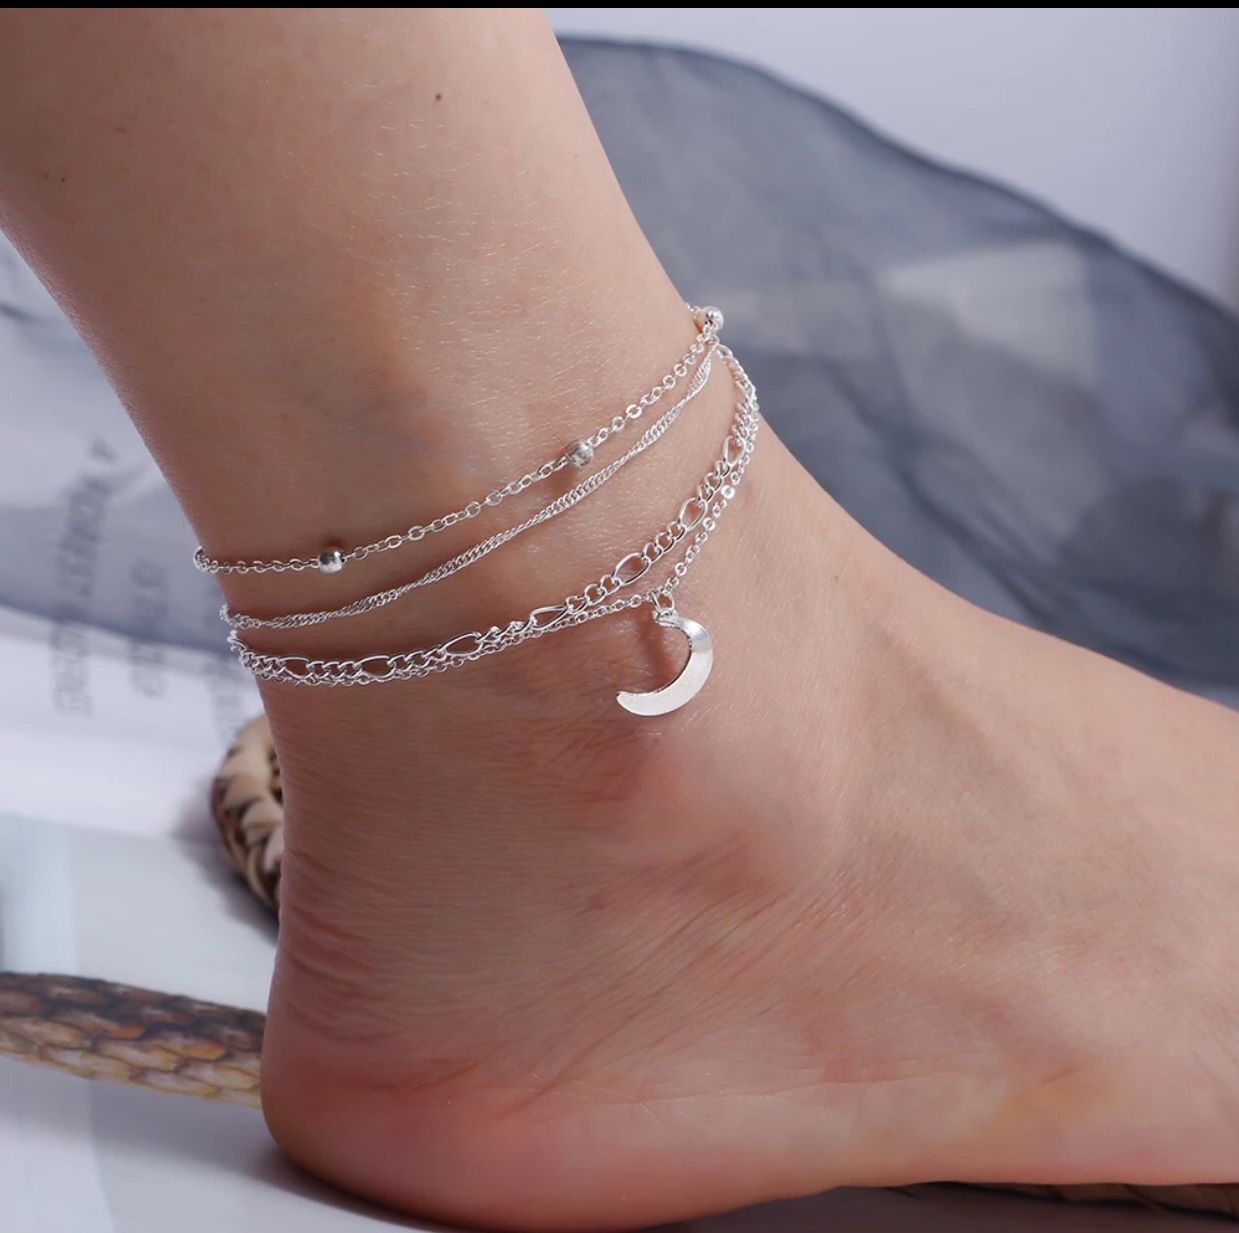 Fashion silver moon pendant anklet for Women